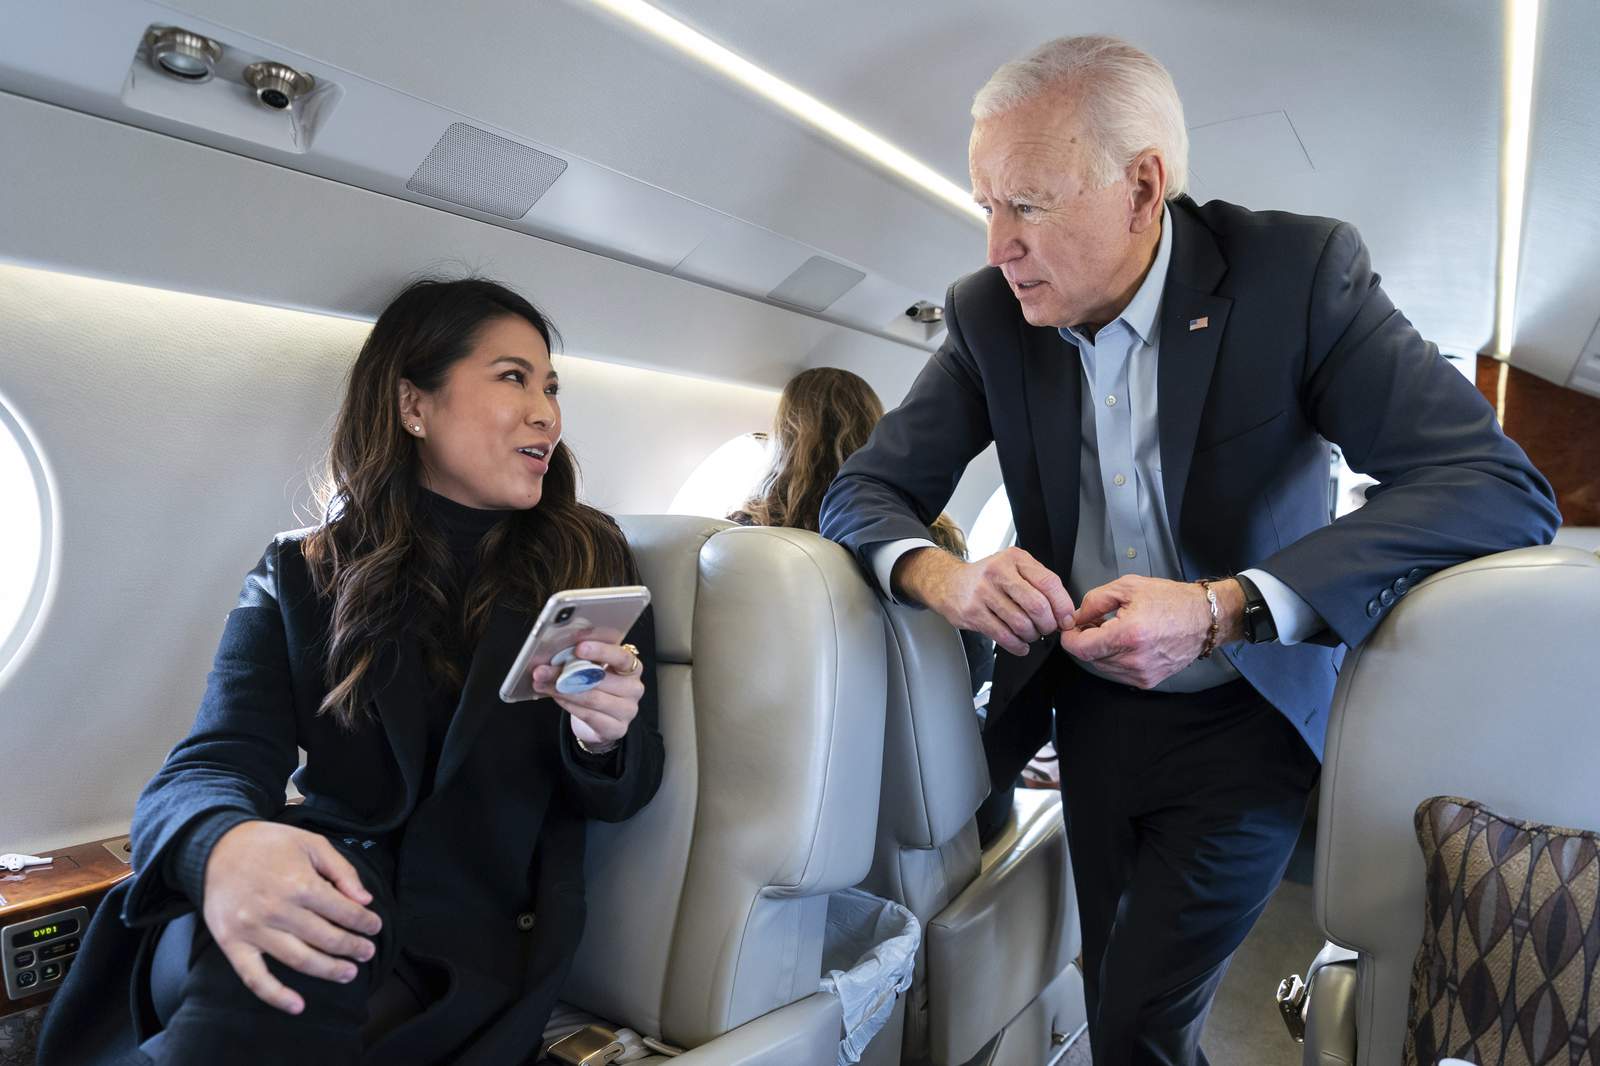 Widely shared photo of Biden without mask was taken in 2019